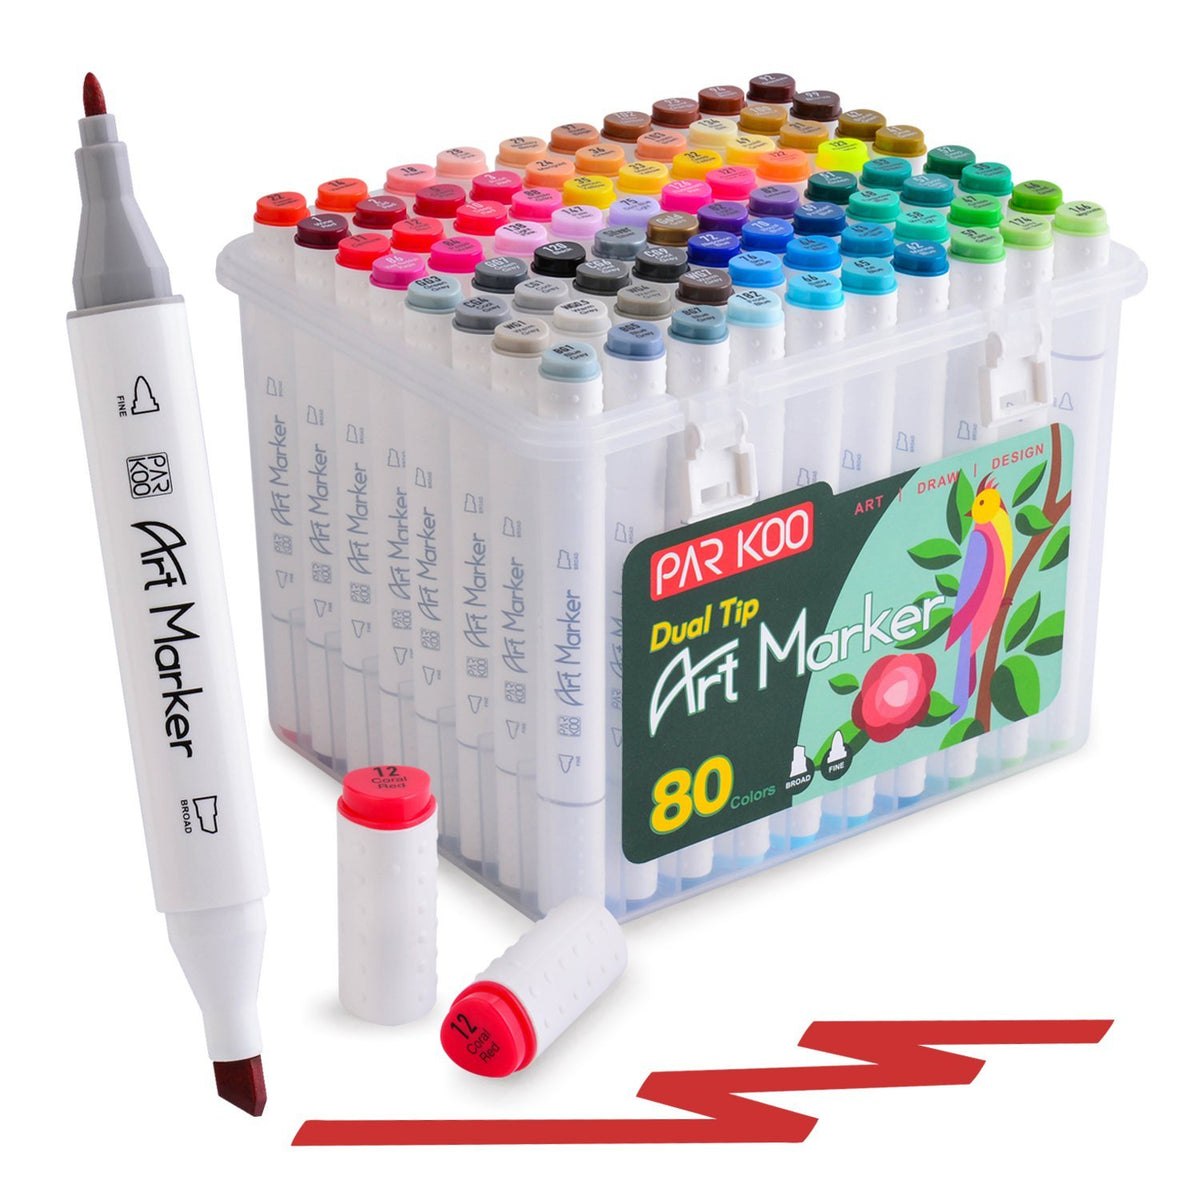 https://cdn.shopify.com/s/files/1/2720/7126/products/parkoo-pens-refills-parkoo-80-colors-dual-tips-alcohol-art-markers-28433437753422_1200x1200.jpg?v=1627996907